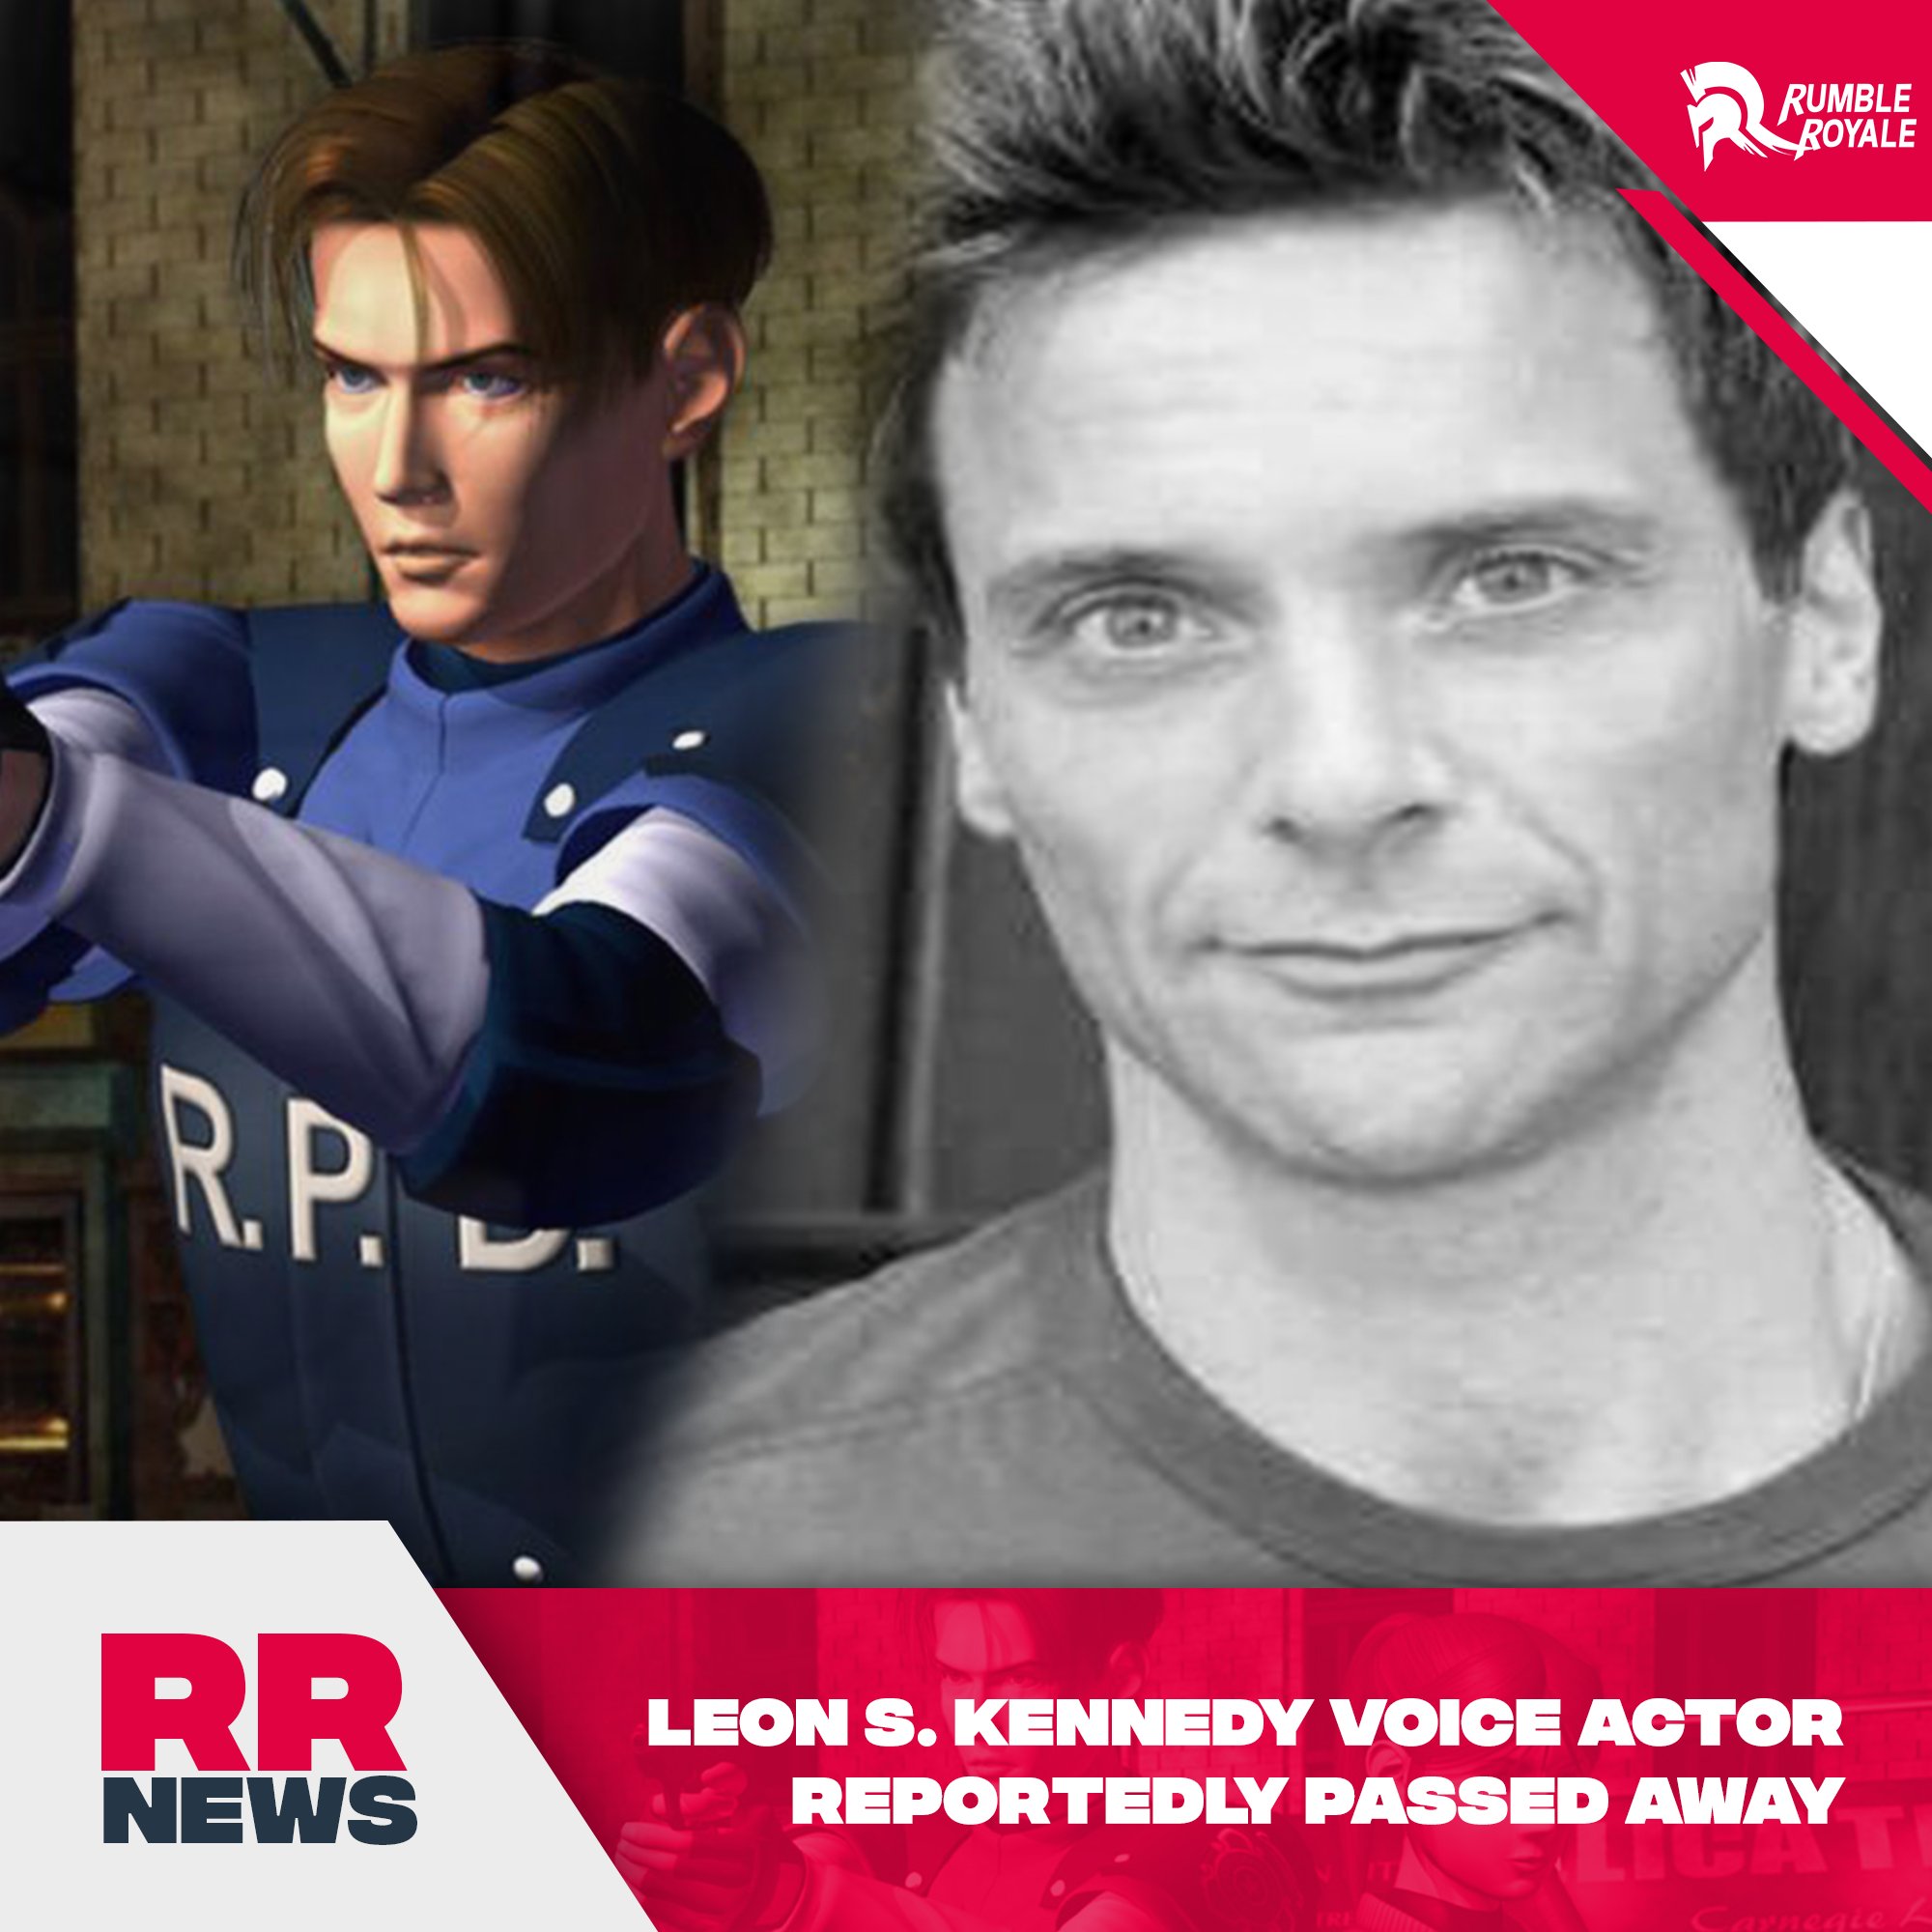 RUMBLE ROYALE on X: PRESS F TO PAY RESPECTS #PaulHaddad, Original  #ResidentEvil2 (1998) #Leon S. Kennedy Voice Actor reportedly passed away.  Cause of death: Unknown #RIP Paul Haddad